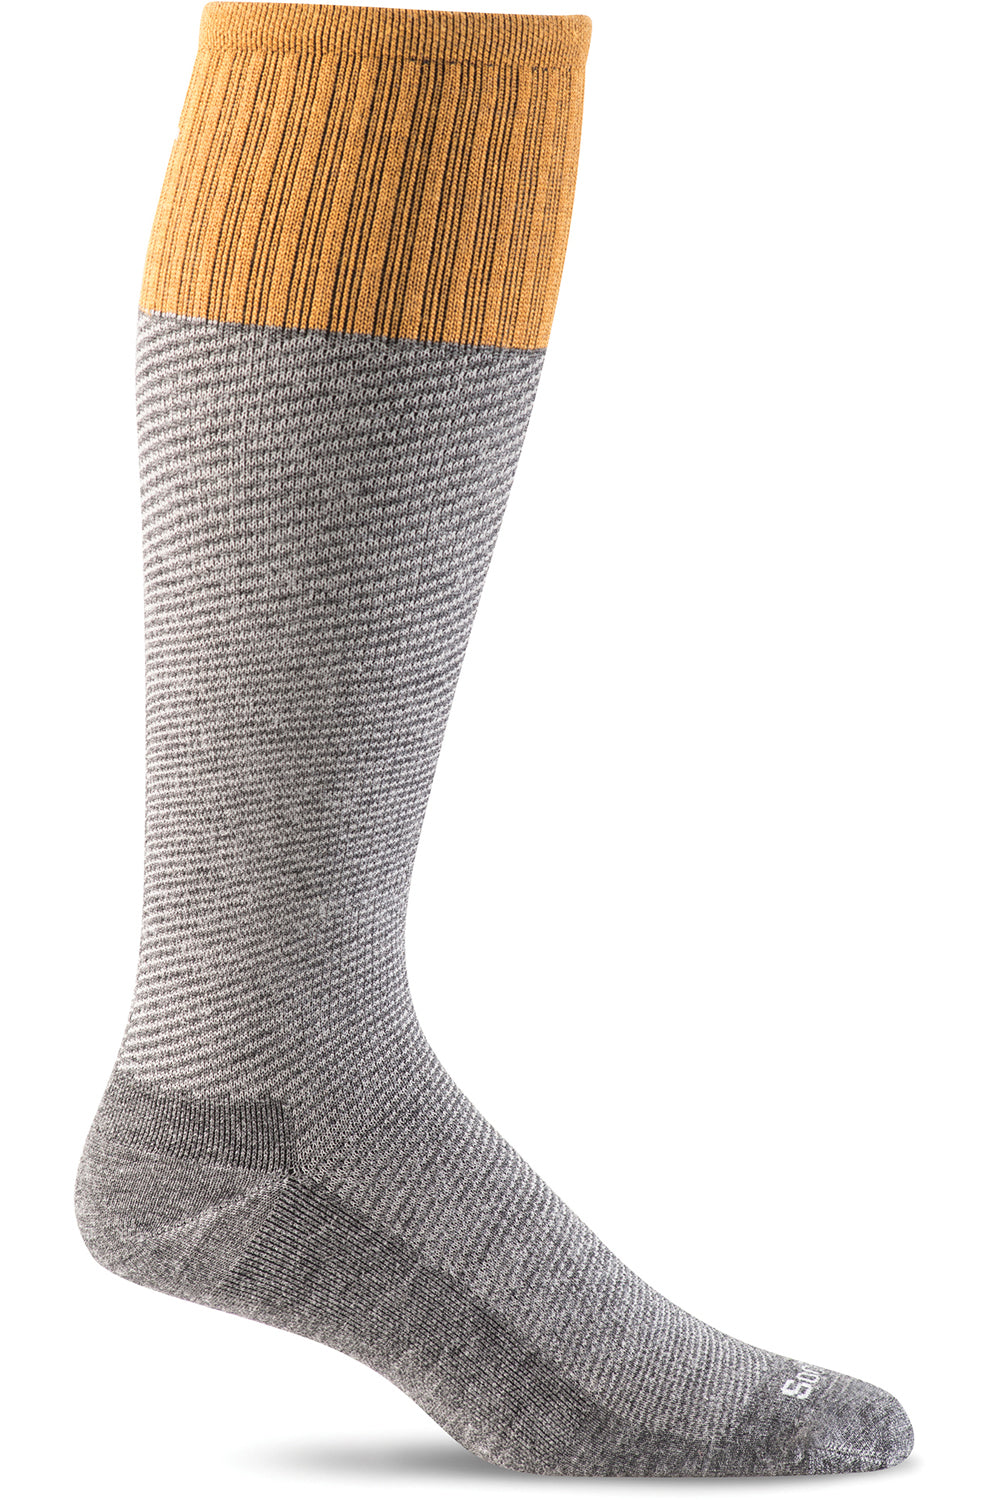 Sockwell Men's Bart Compression Sock in Charcoal color from the side